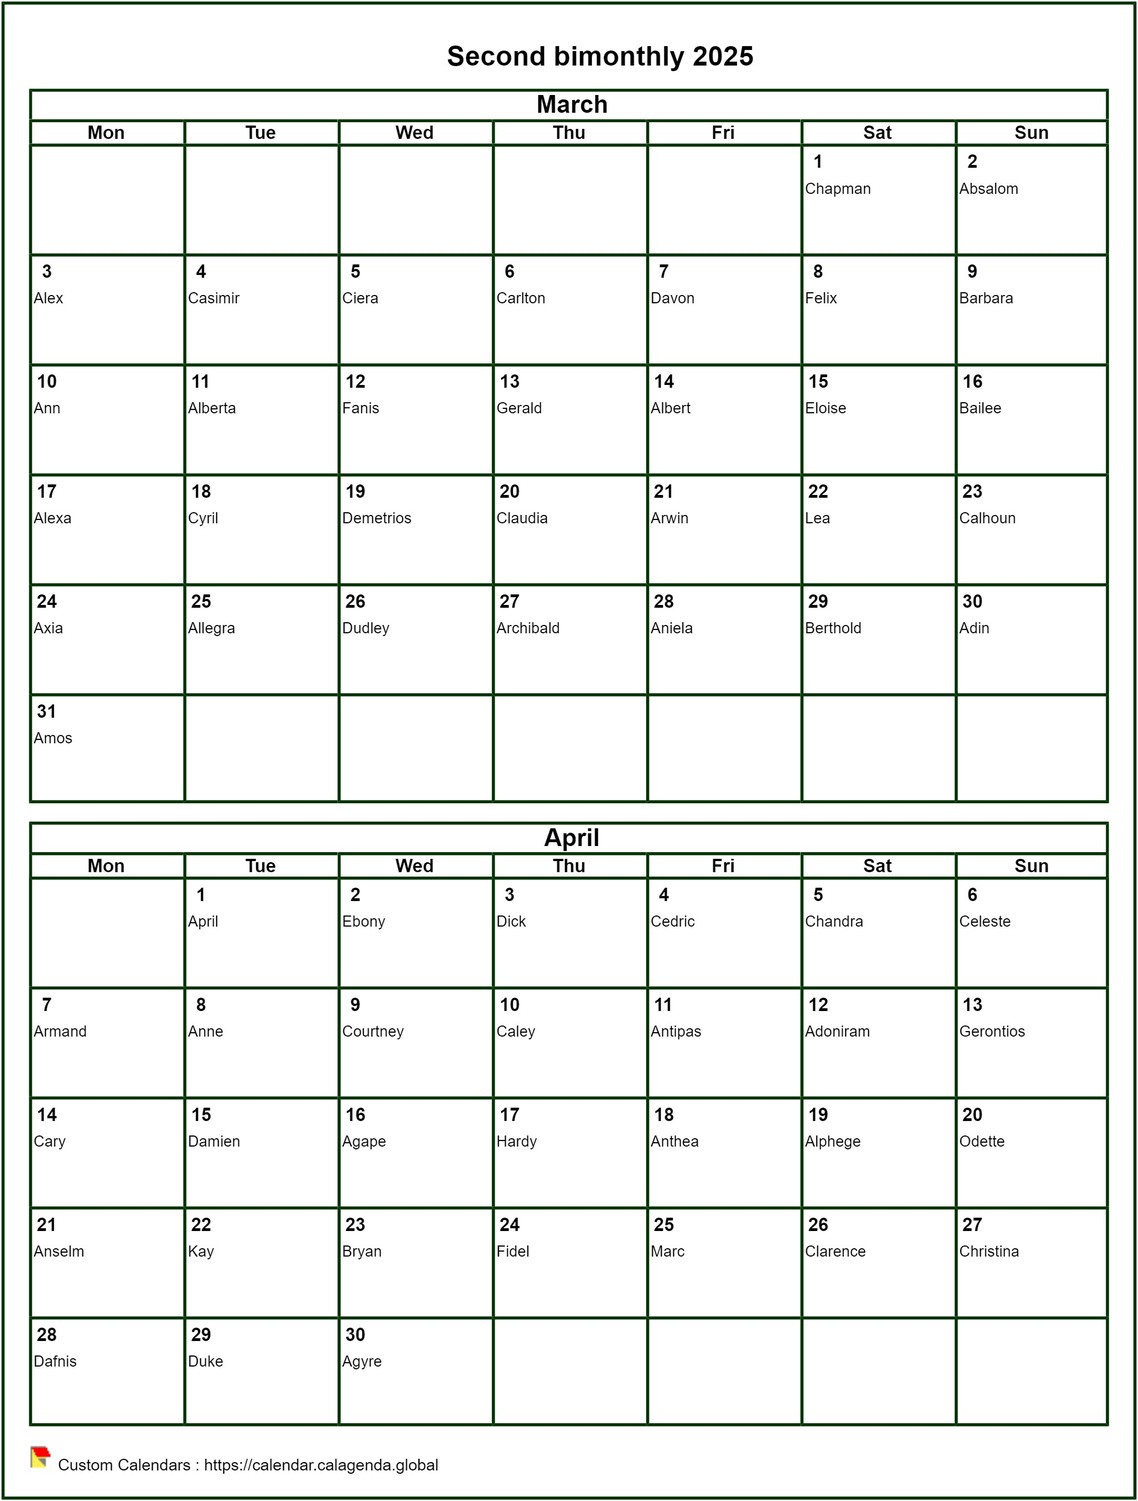 Calendar 2025 bimonthly, format portrait, with names